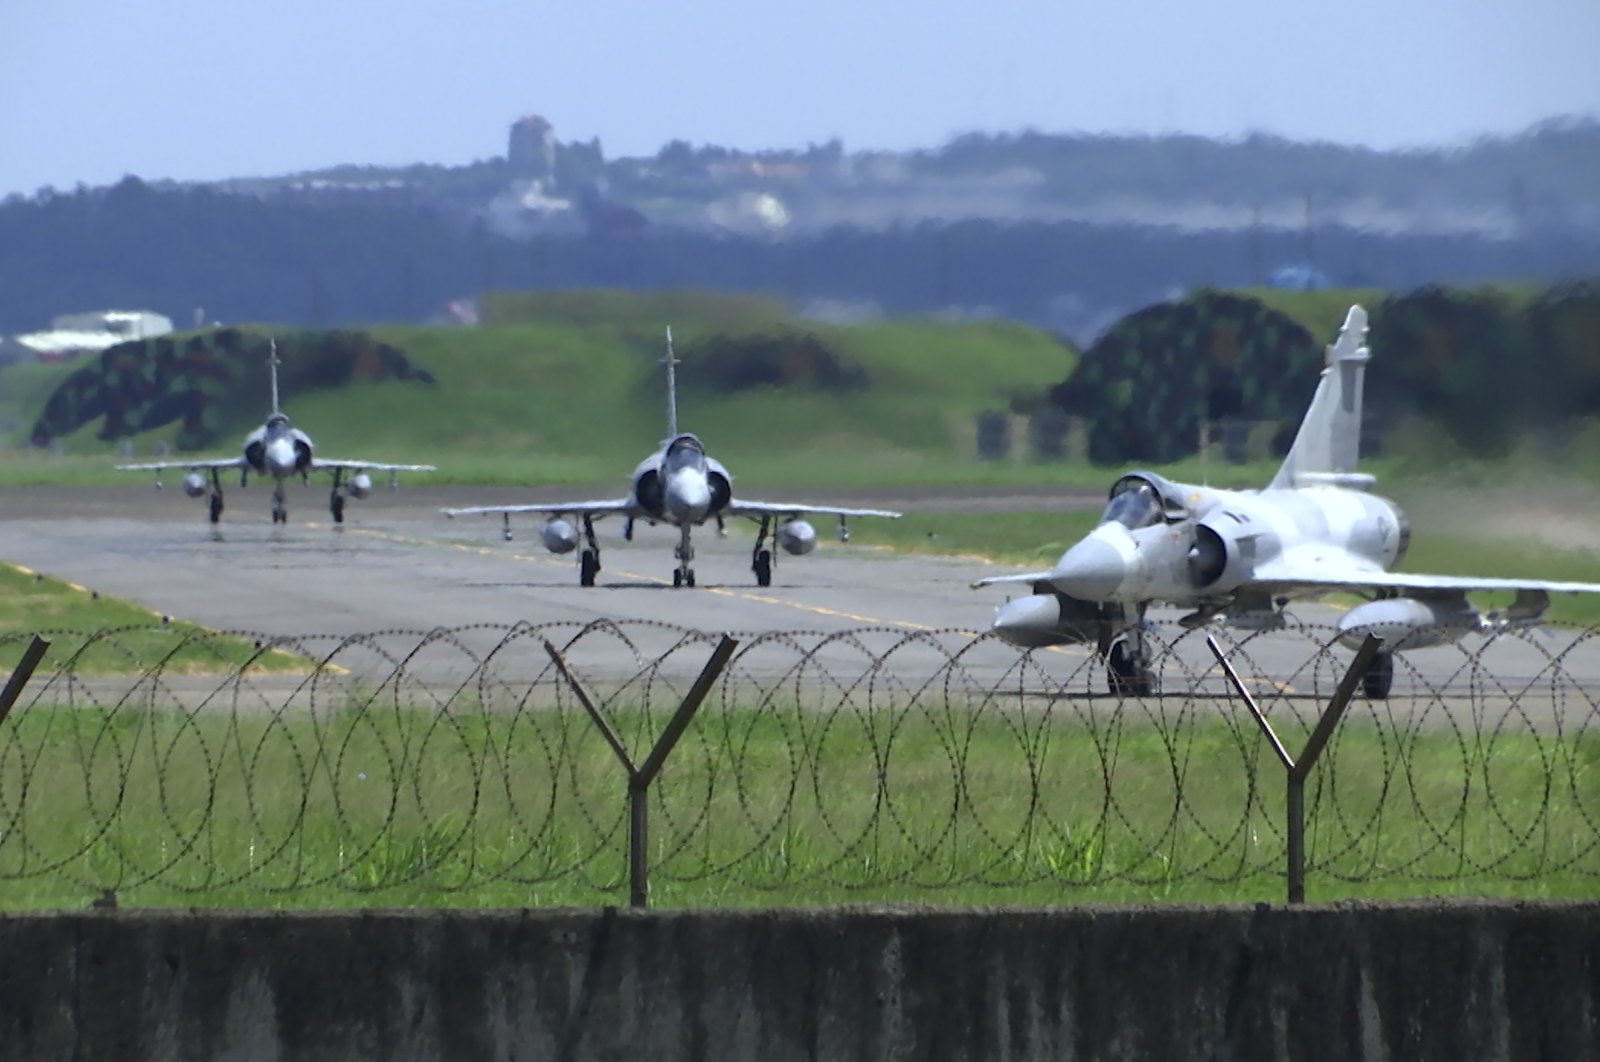 Taiwan Air Force Mirage fighter jets taxi on a runway at an airbase in Hsinchu, Taiwan, Aug. 5, 2022. (AP Photo)